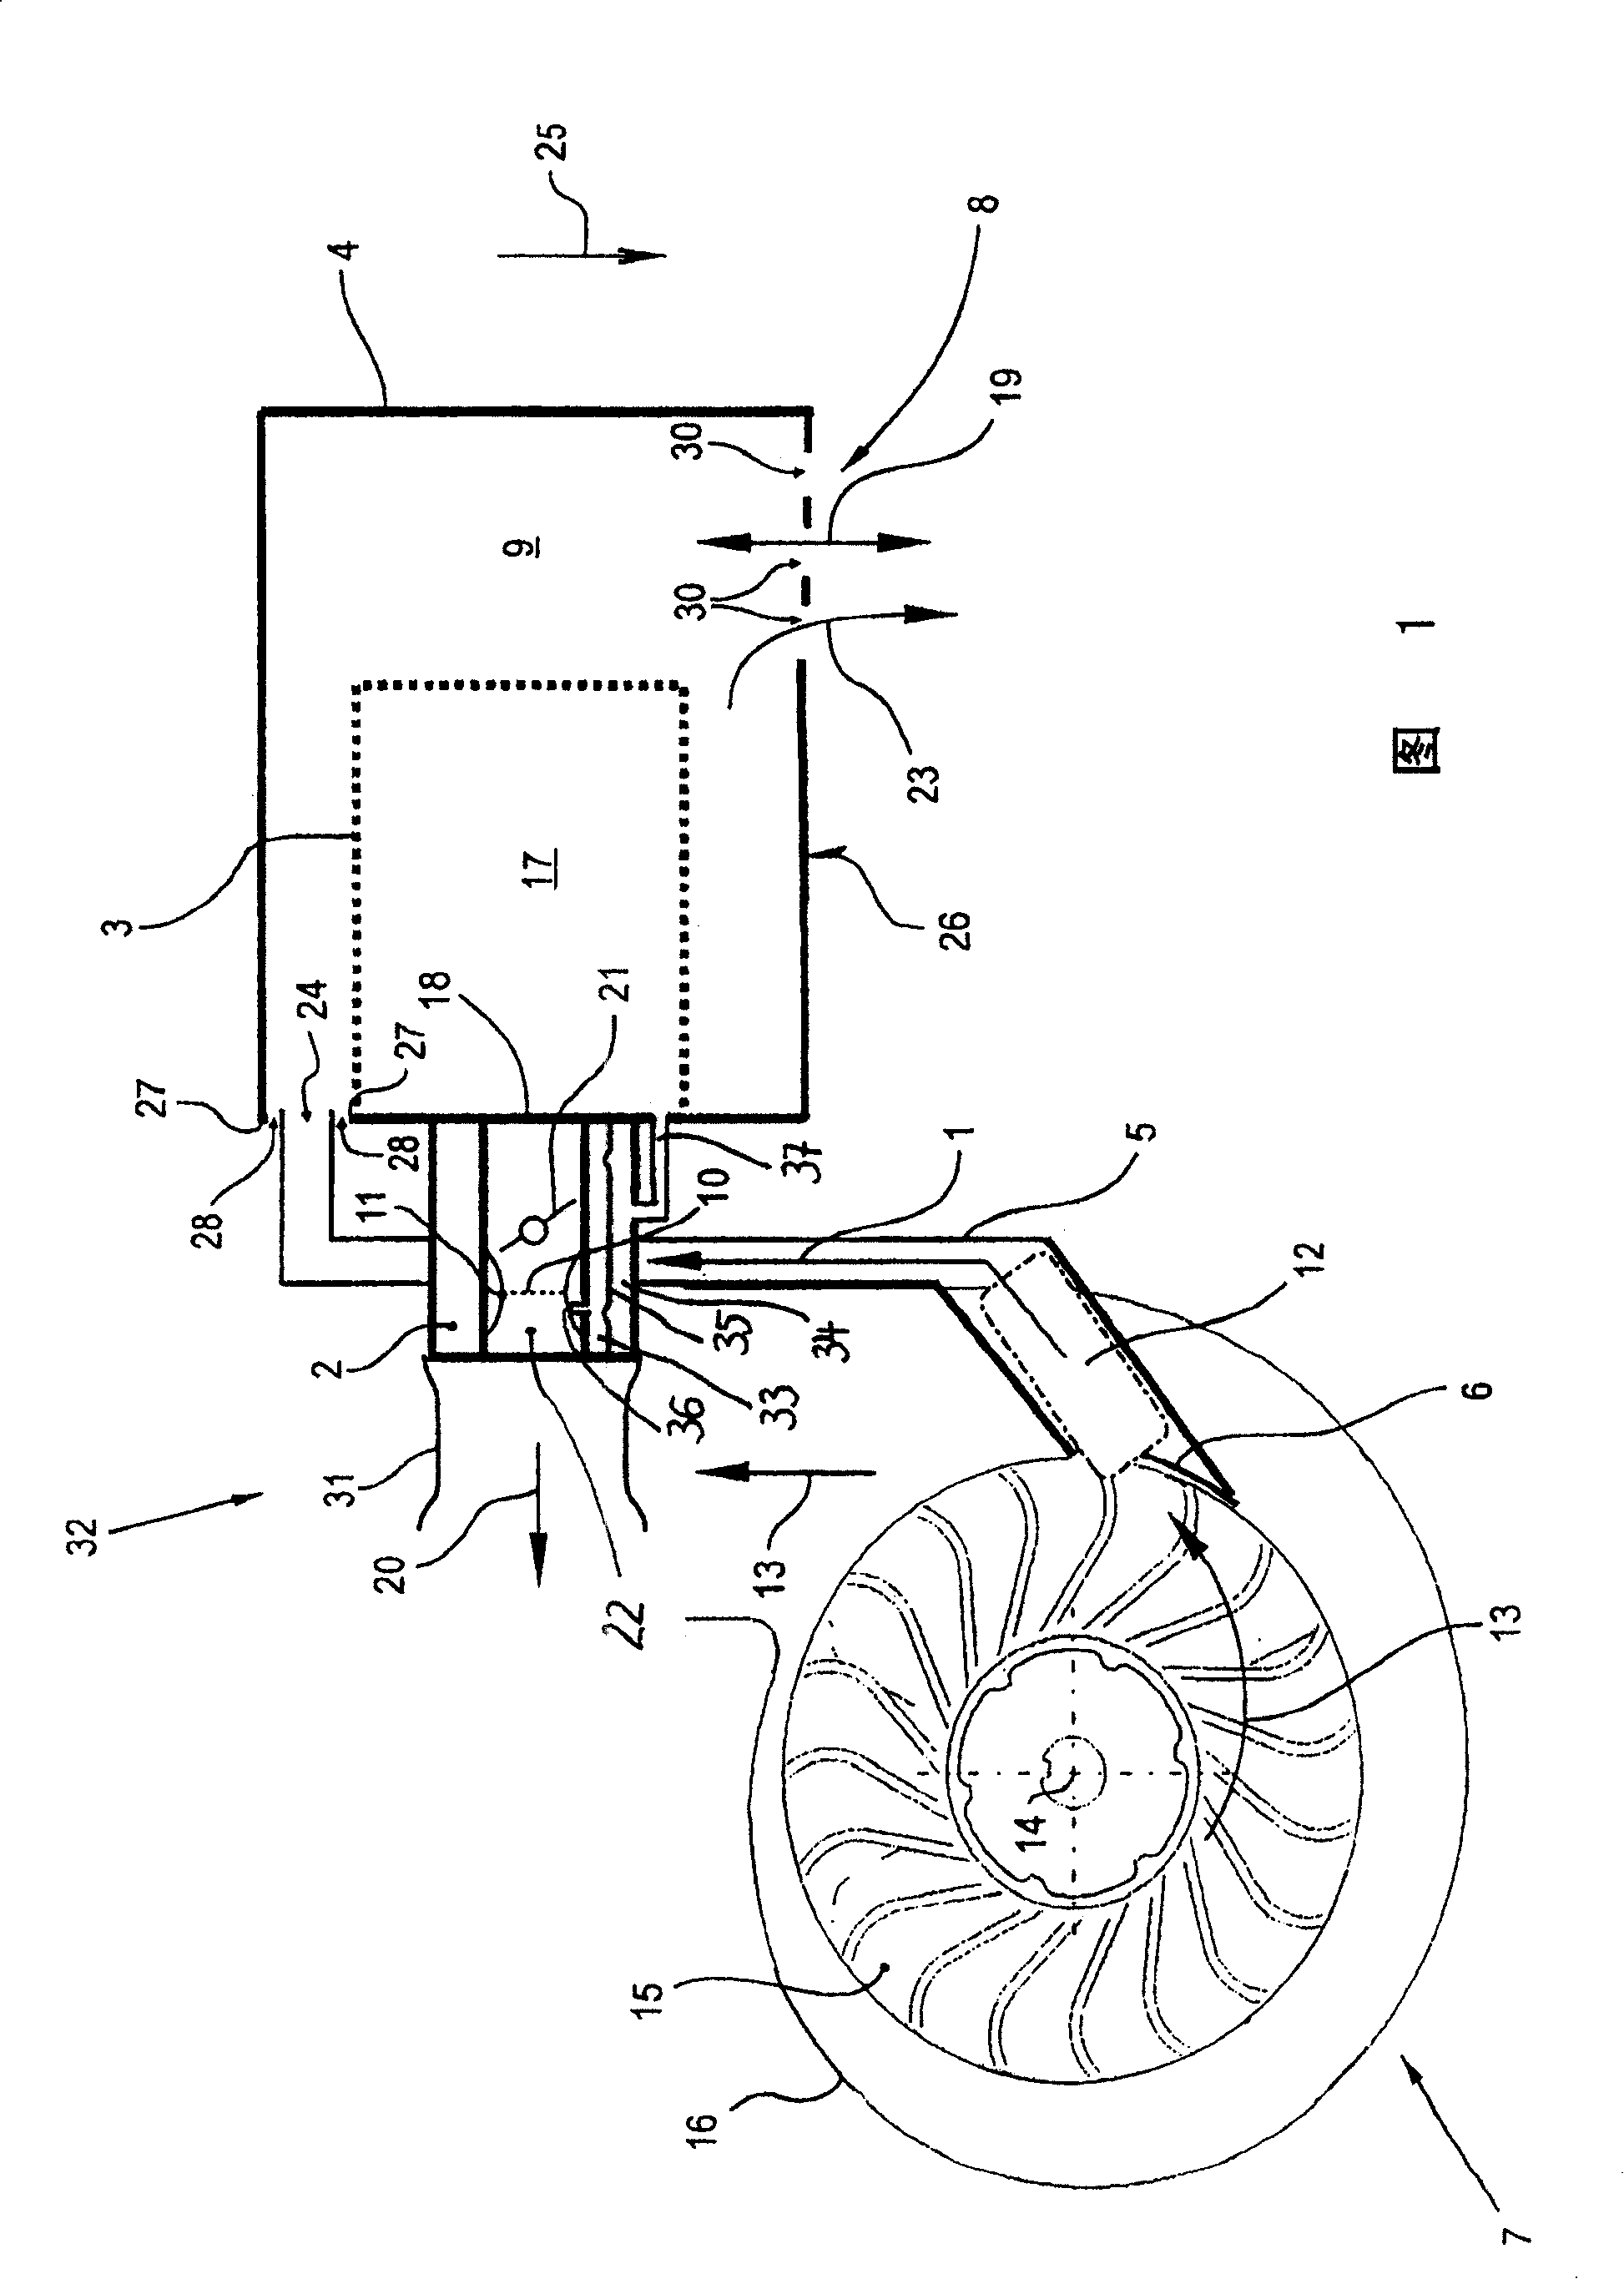 Intake system for internal-combustion engine of hand-hold work tool